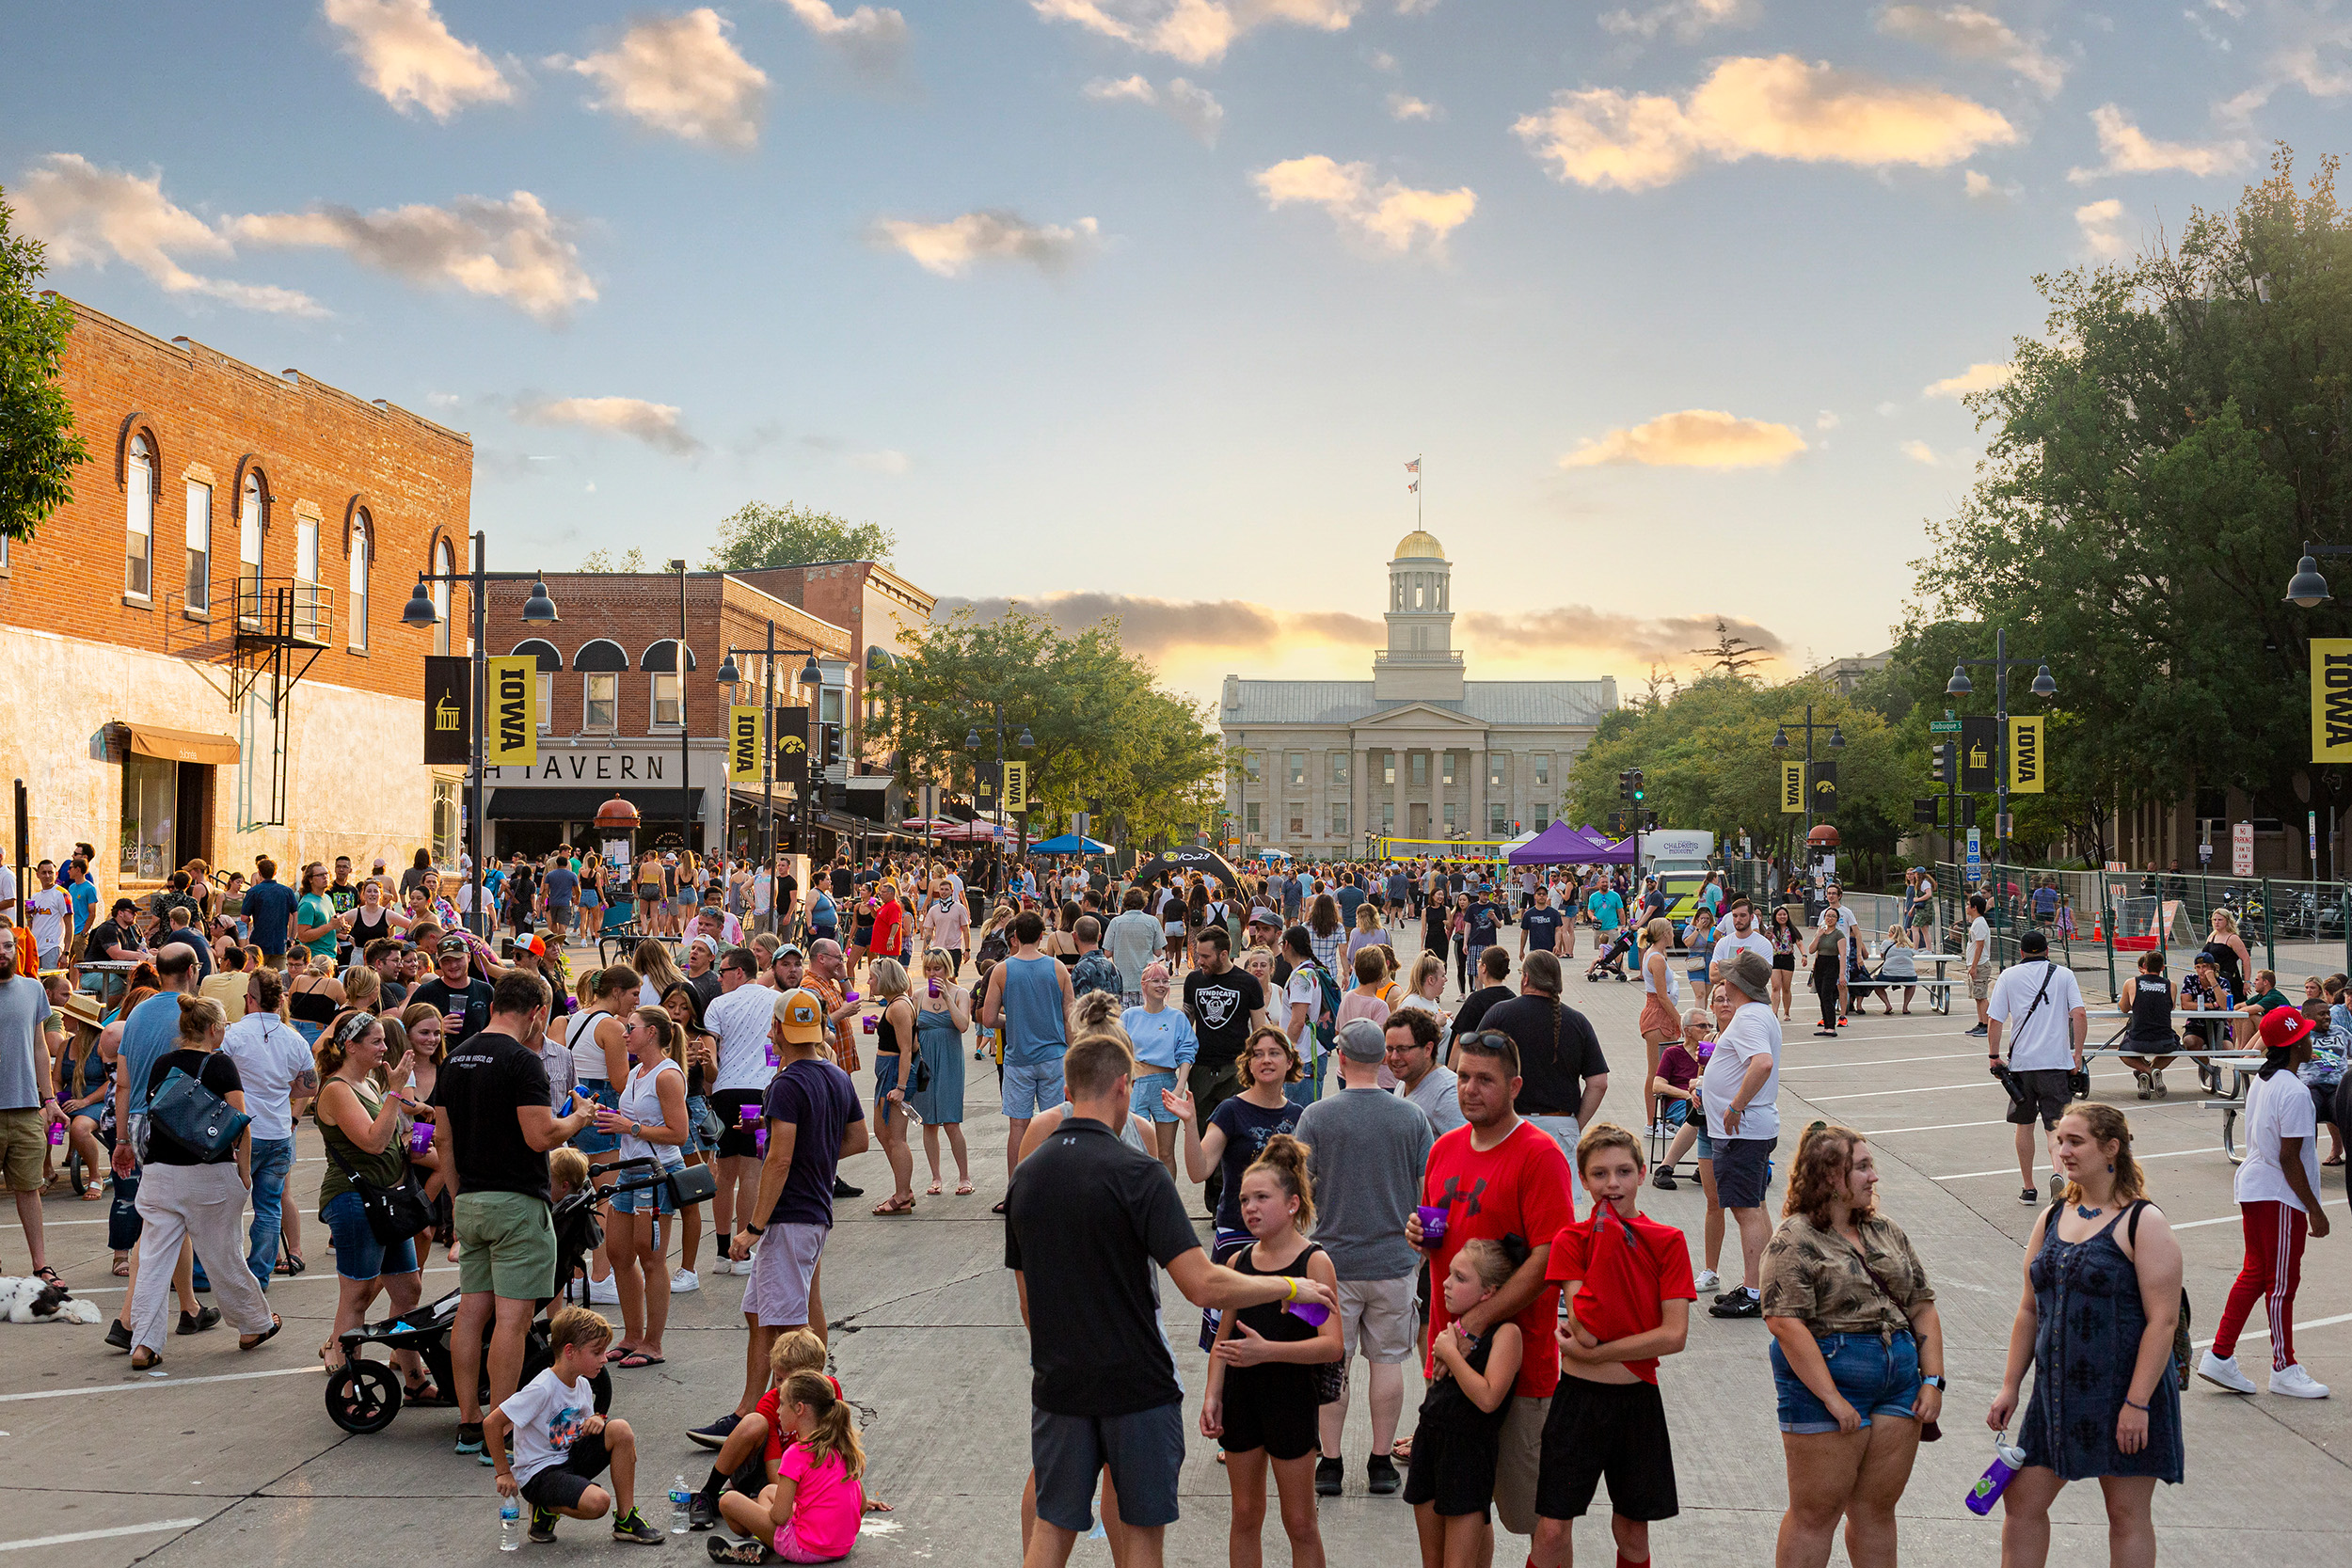 crowd of people at downtown Iowa city block party event